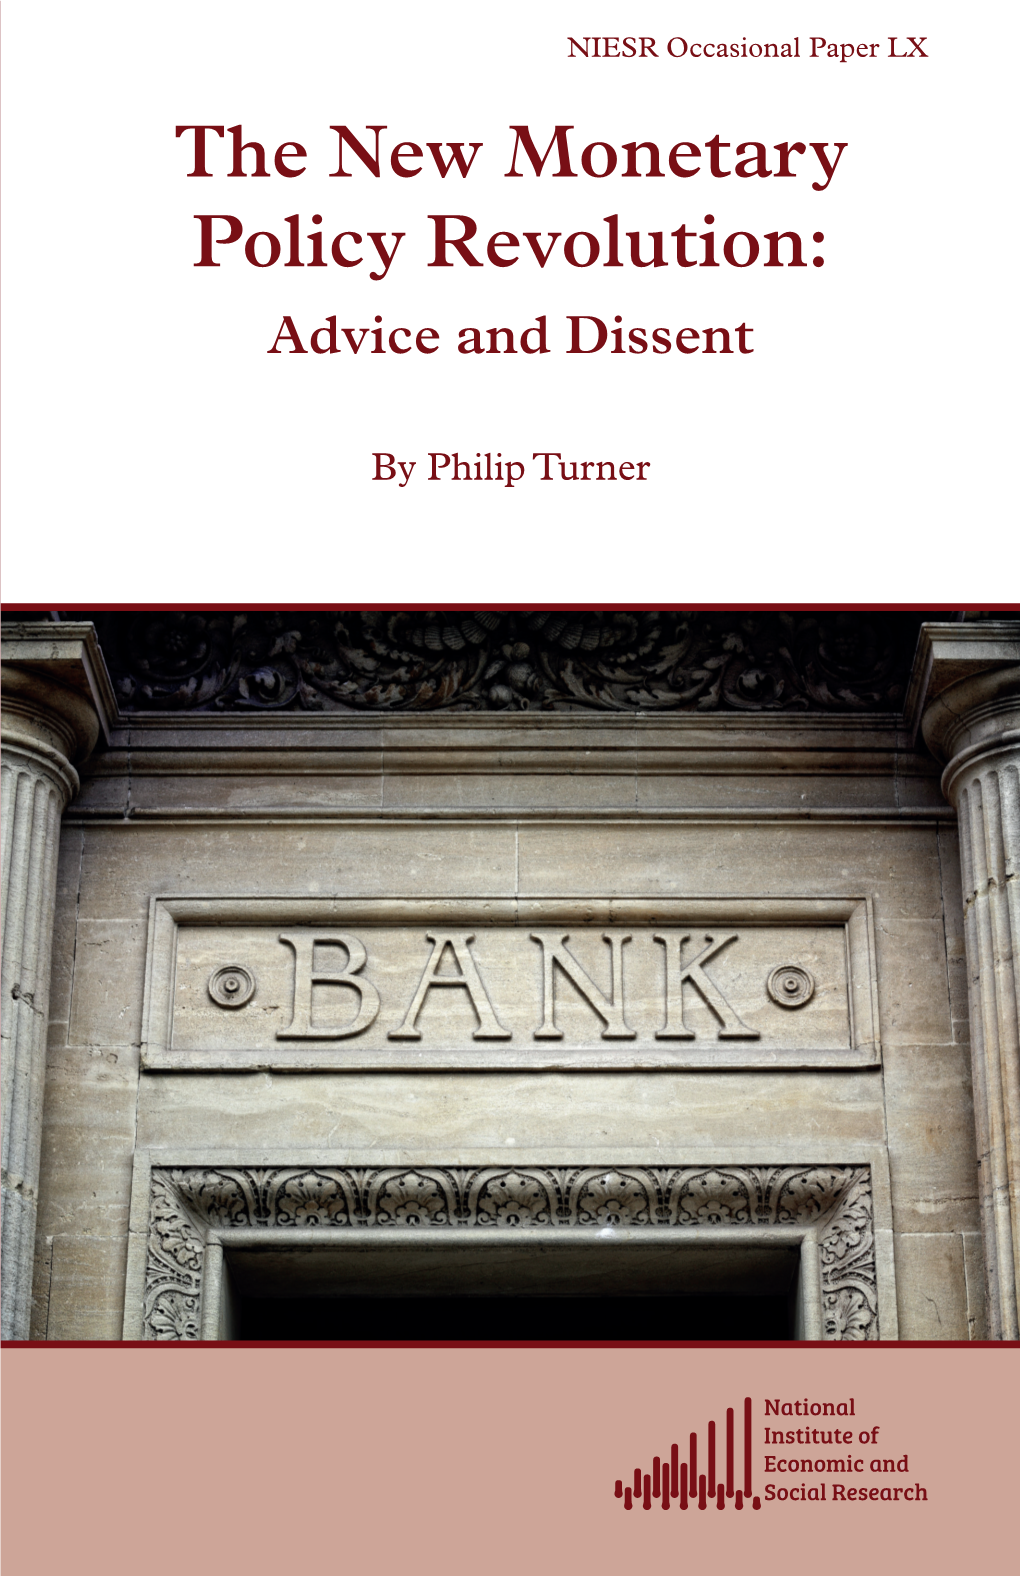 The New Monetary Policy Revolution: Advice and Dissent